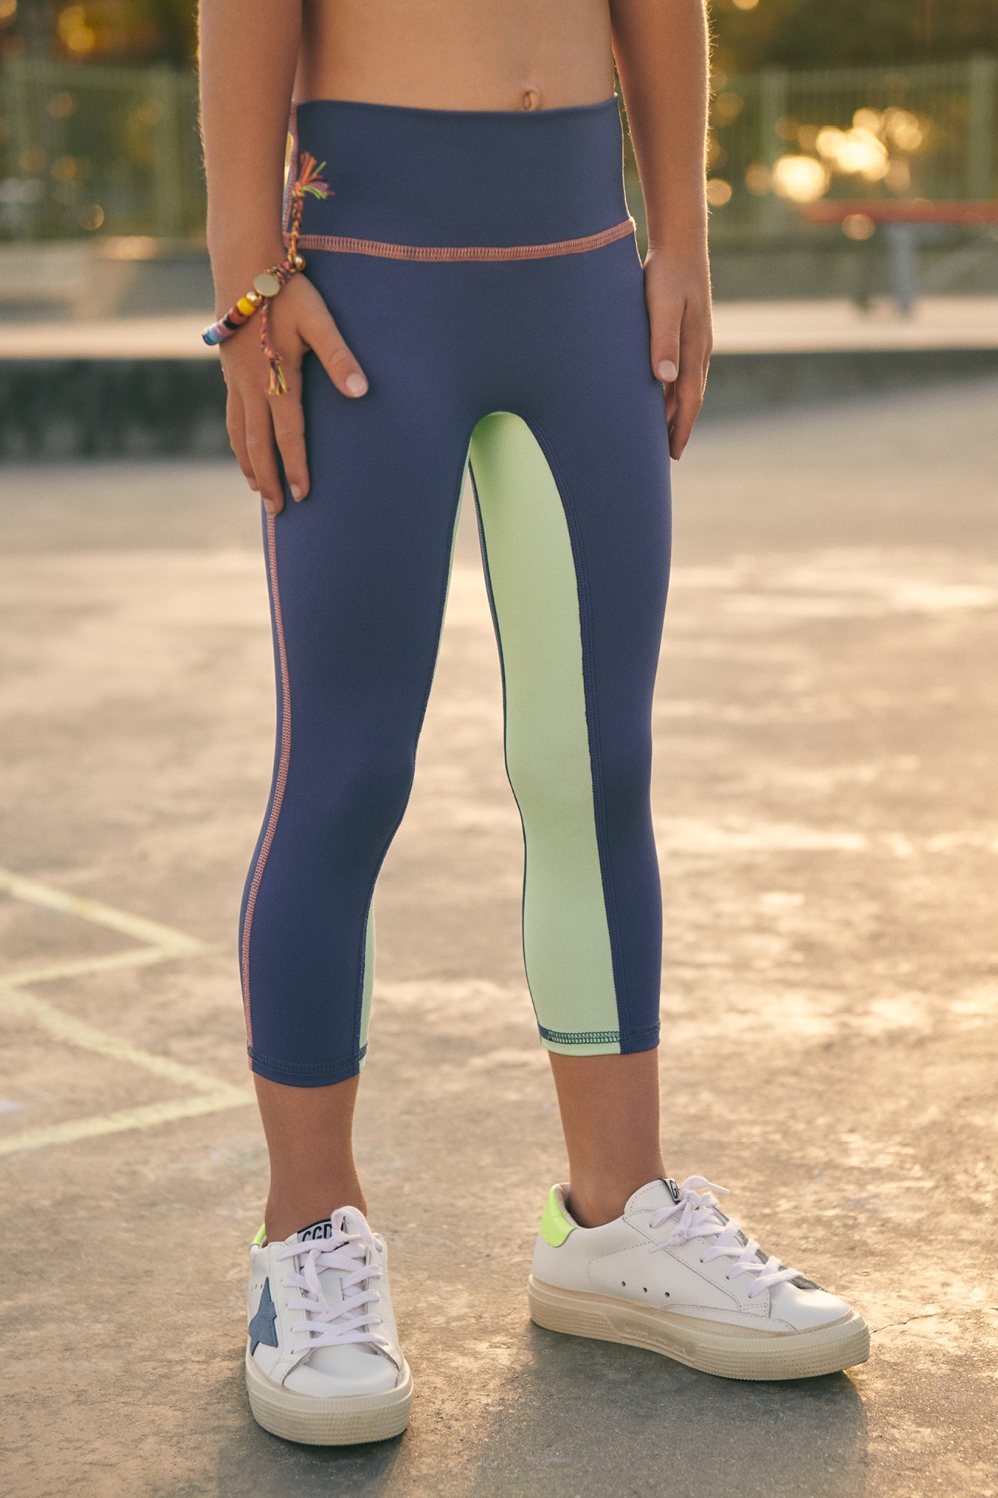 Motion 365 made by Fabletics Girls' Clothing On Sale Up To 90% Off Retail